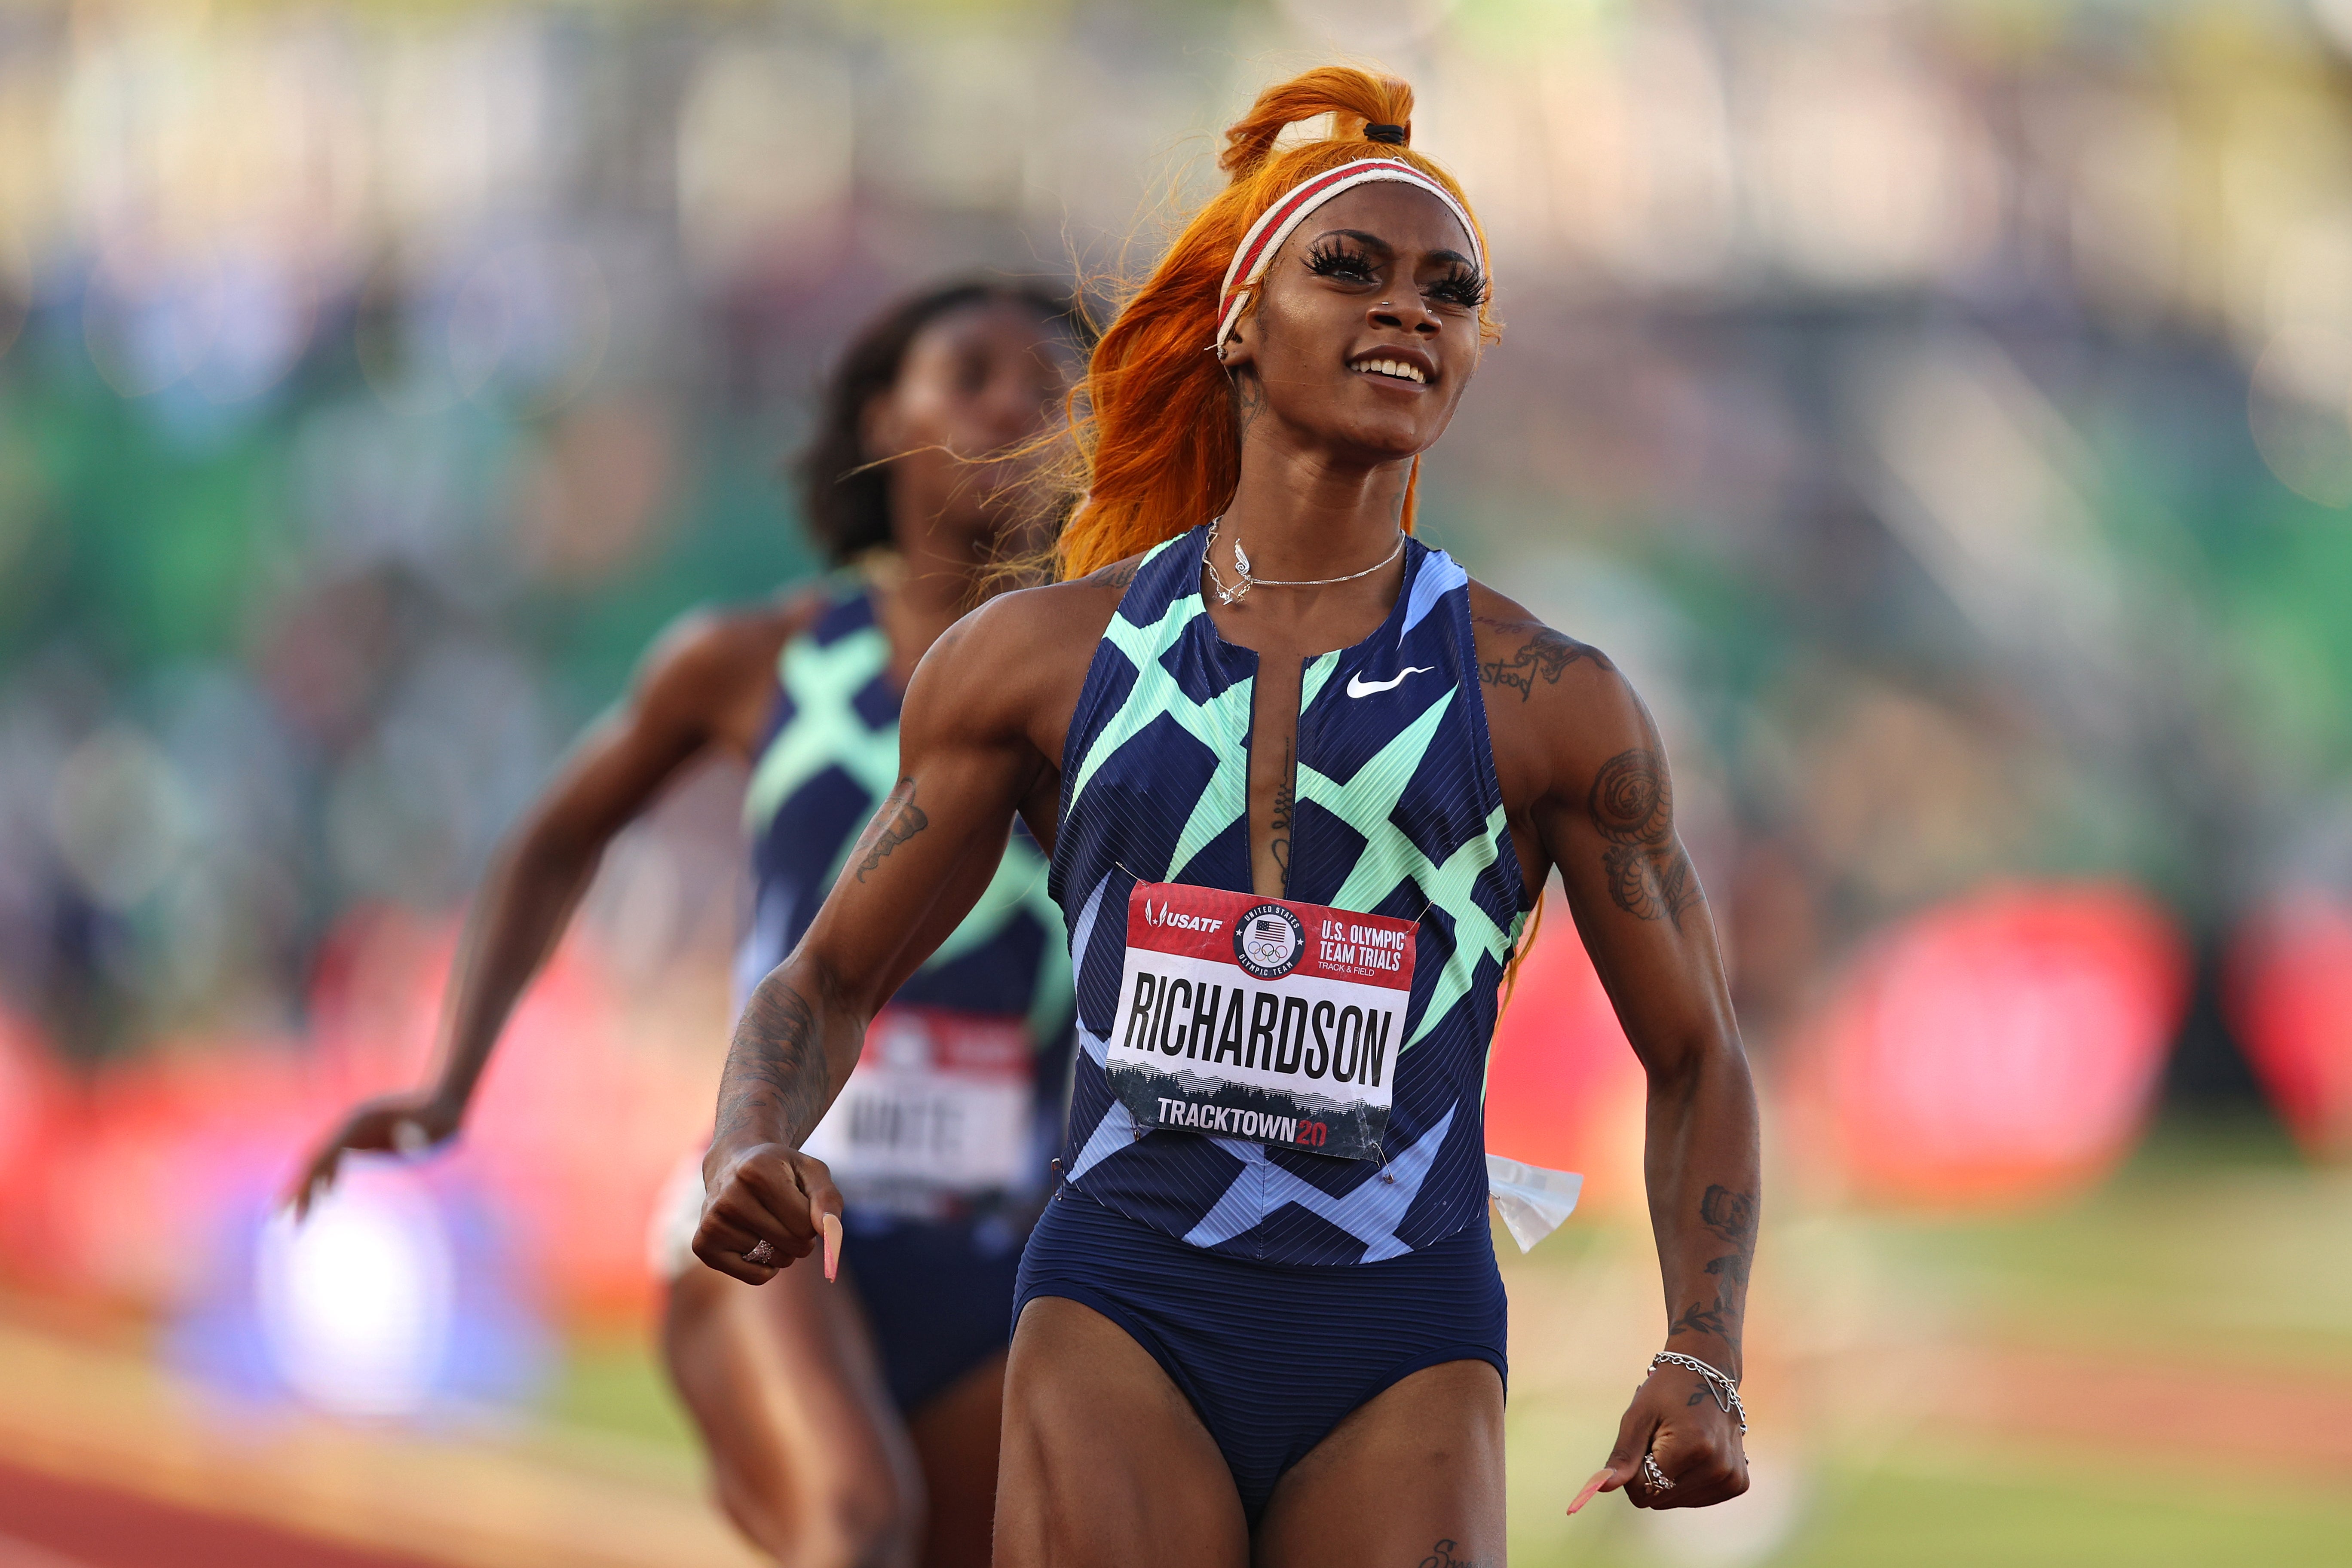 Sha’Carri Richardson runs in the Women’s 100 Meter semifinal on day 2 of the 2020 US Olympic Track & Field Team Trials at Hayward Field on 19 June, 2021 in Eugene, Oregon. Ms Richardson has been suspended after testing positive for marijuana.